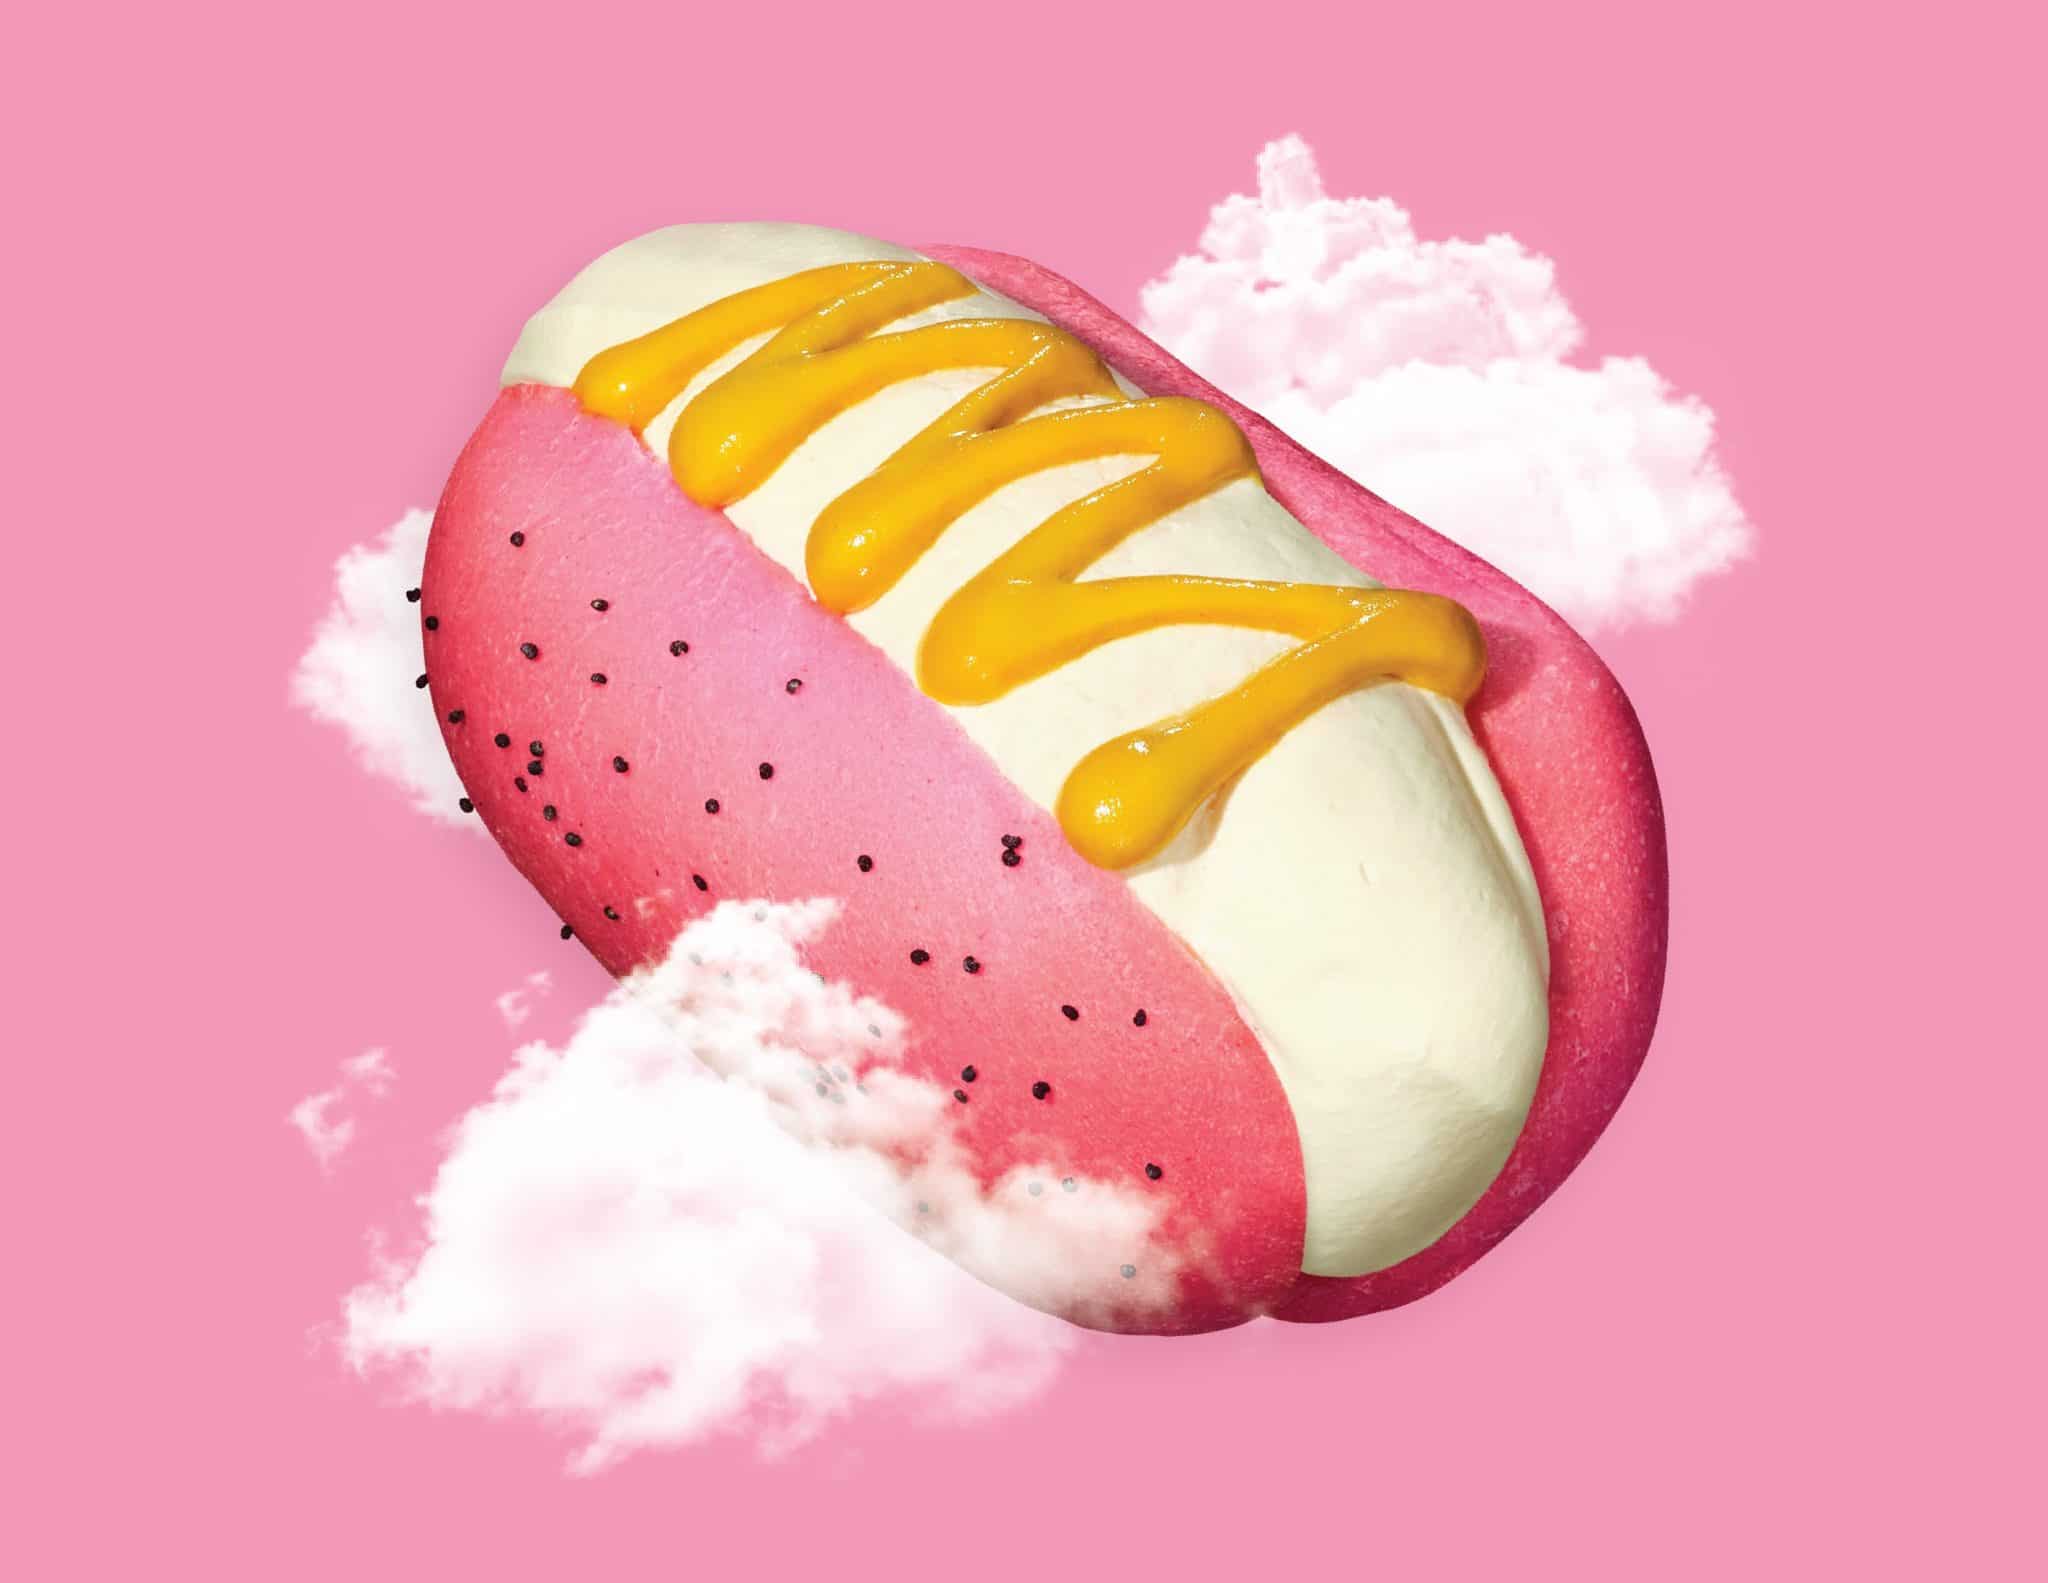 Image of the Chicago-style ice cream hot dog courtesy of the Museum of Ice Cream